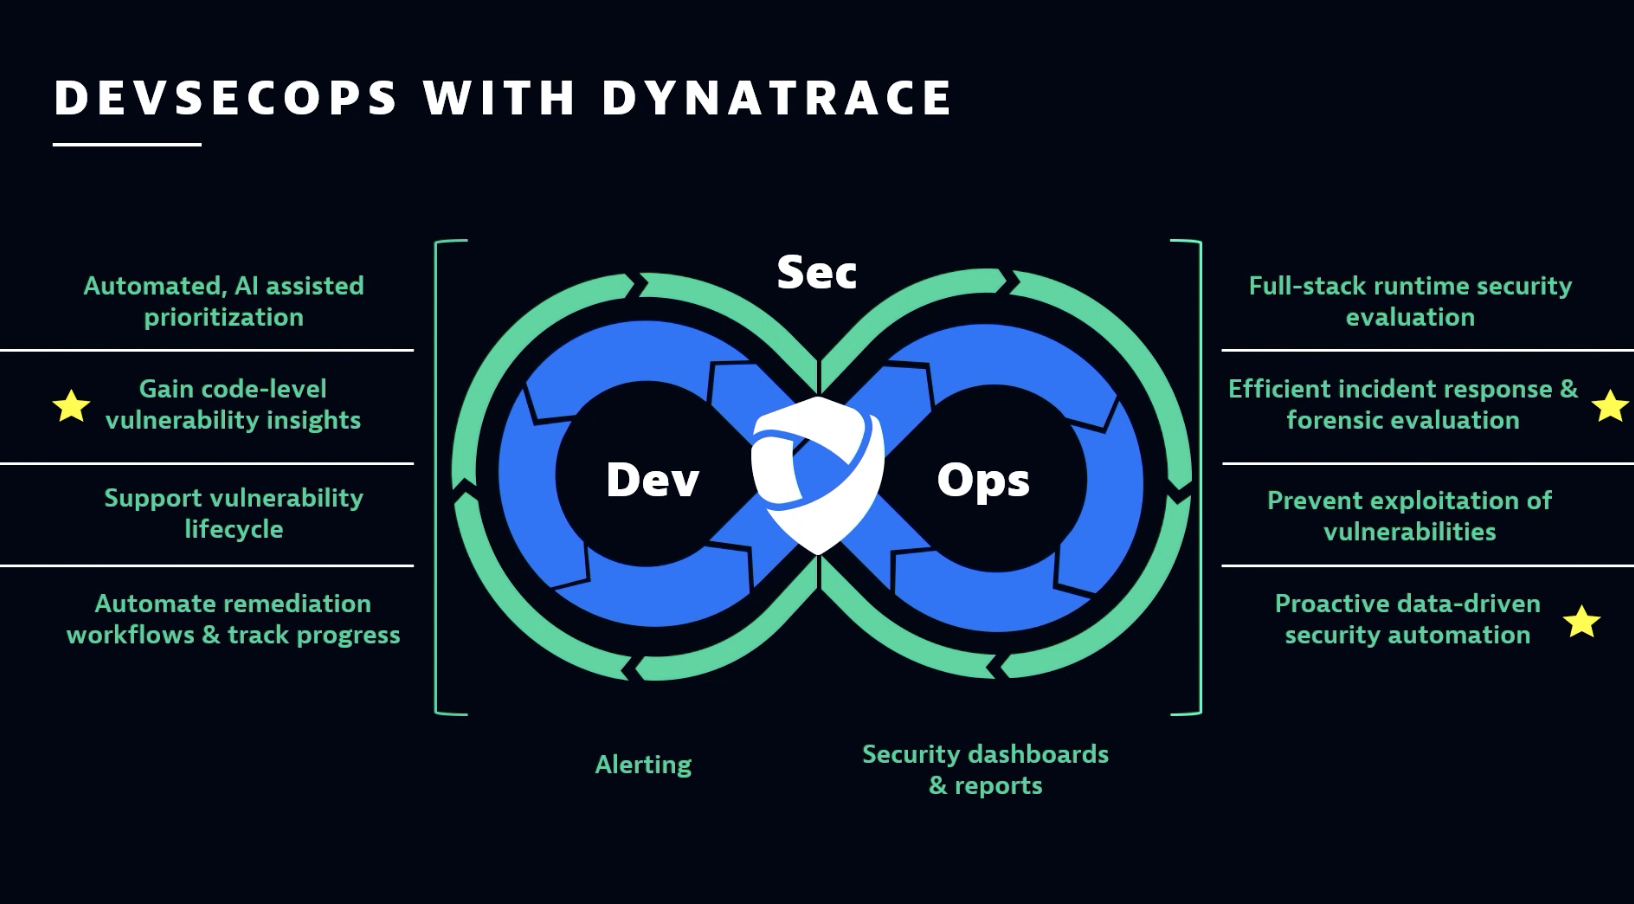 DevSecOps with Dynatrace